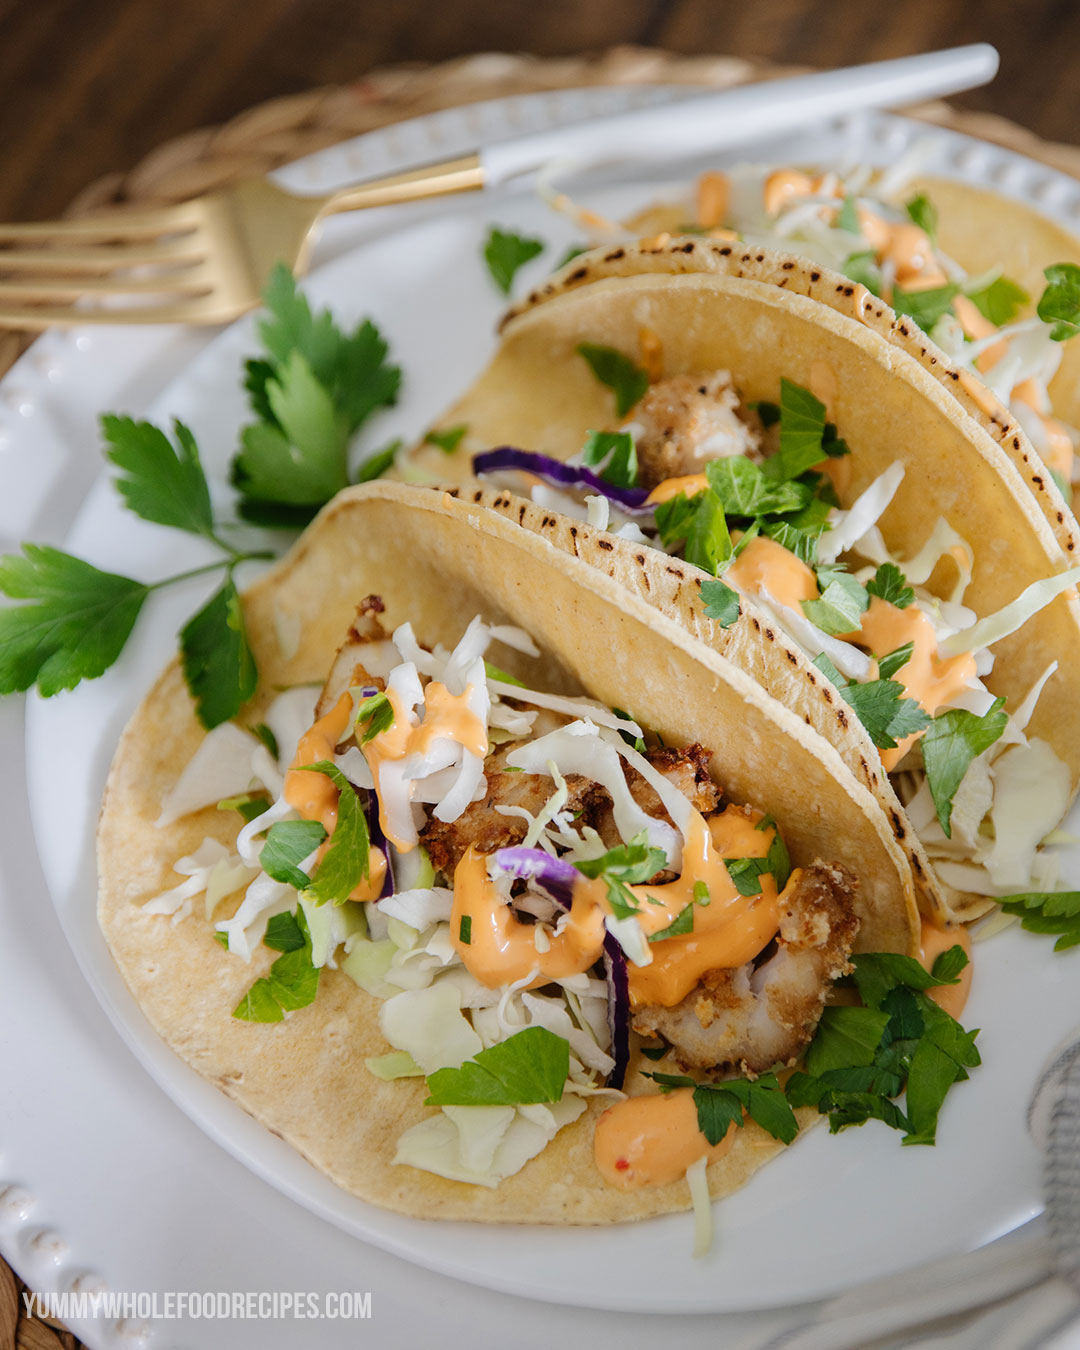 Crispy Fish Tacos Recipe - make it with the air fryer or oven!